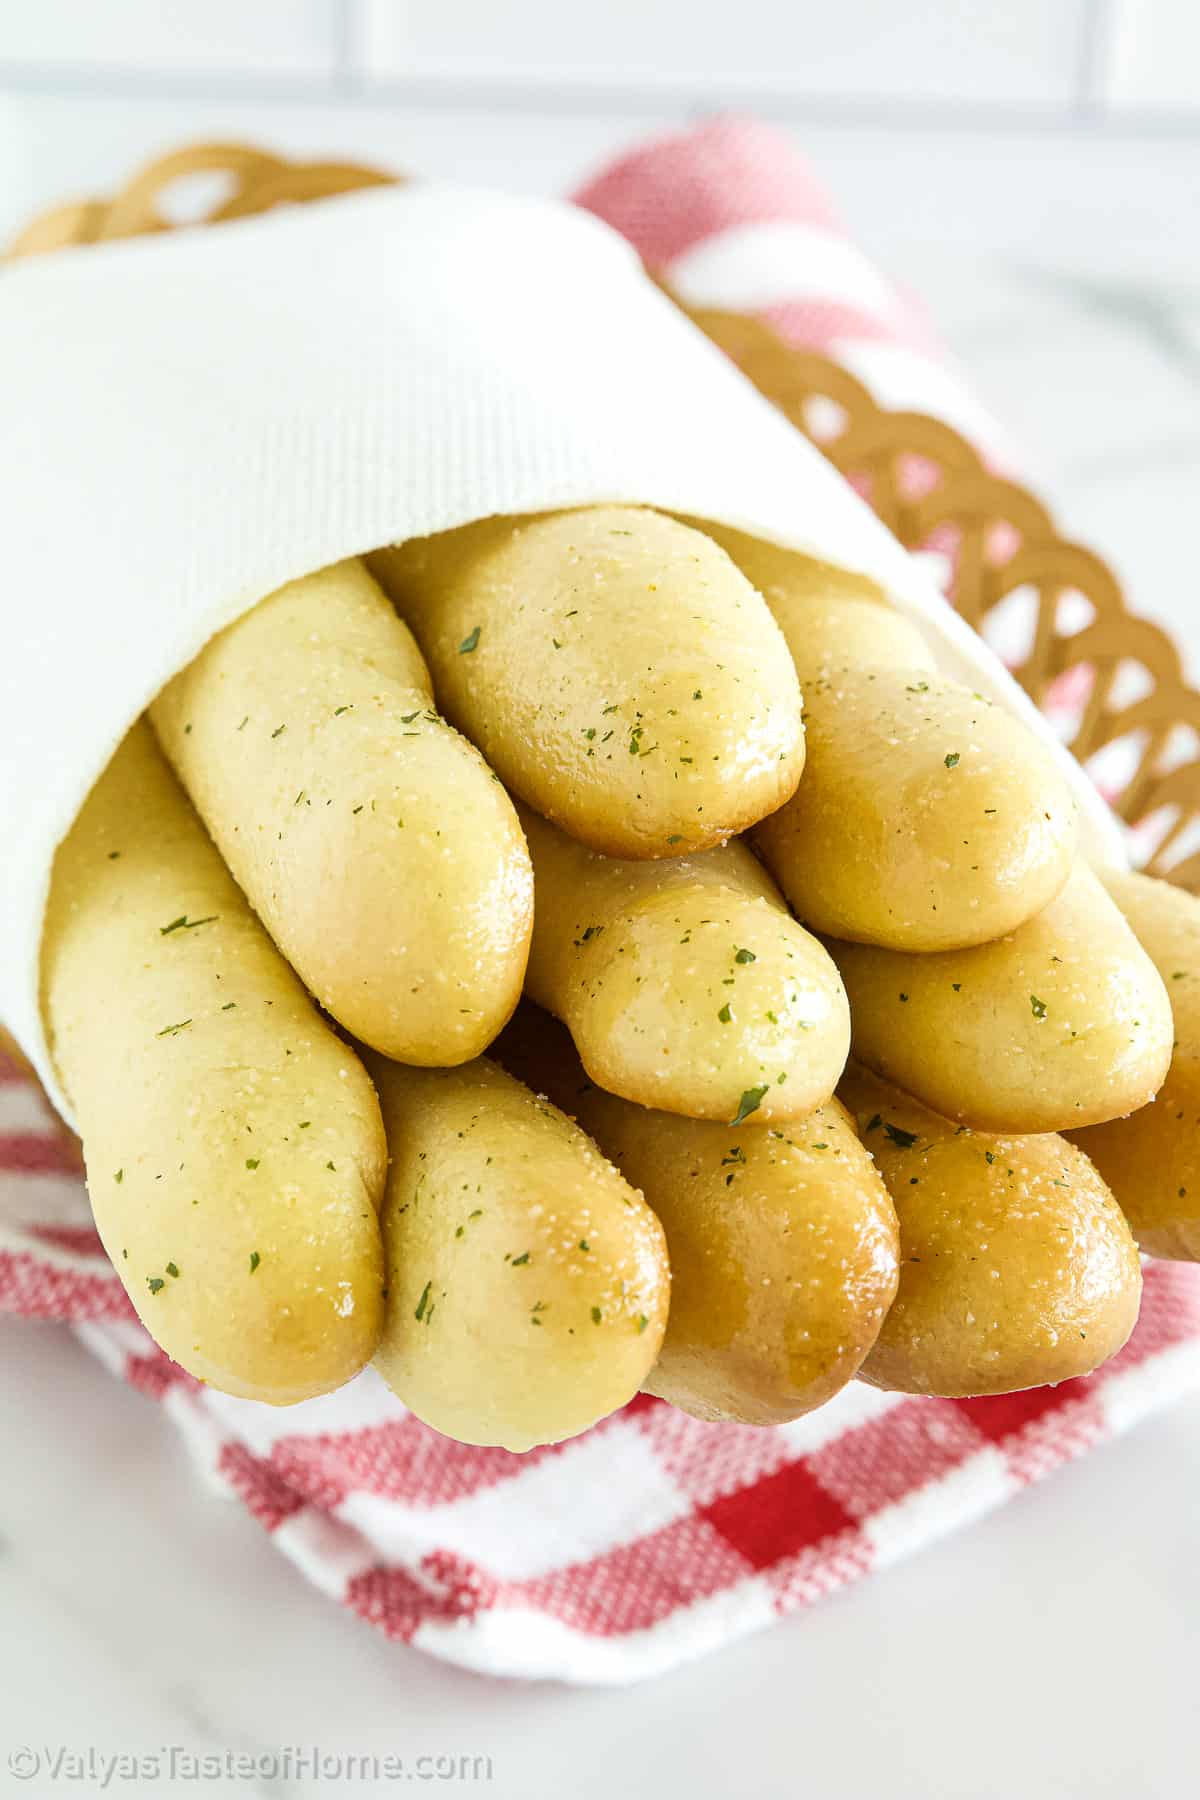 These homemade breadsticks are incredibly light, fluffy, and soft with the perfect crust but are easy to make from scratch.